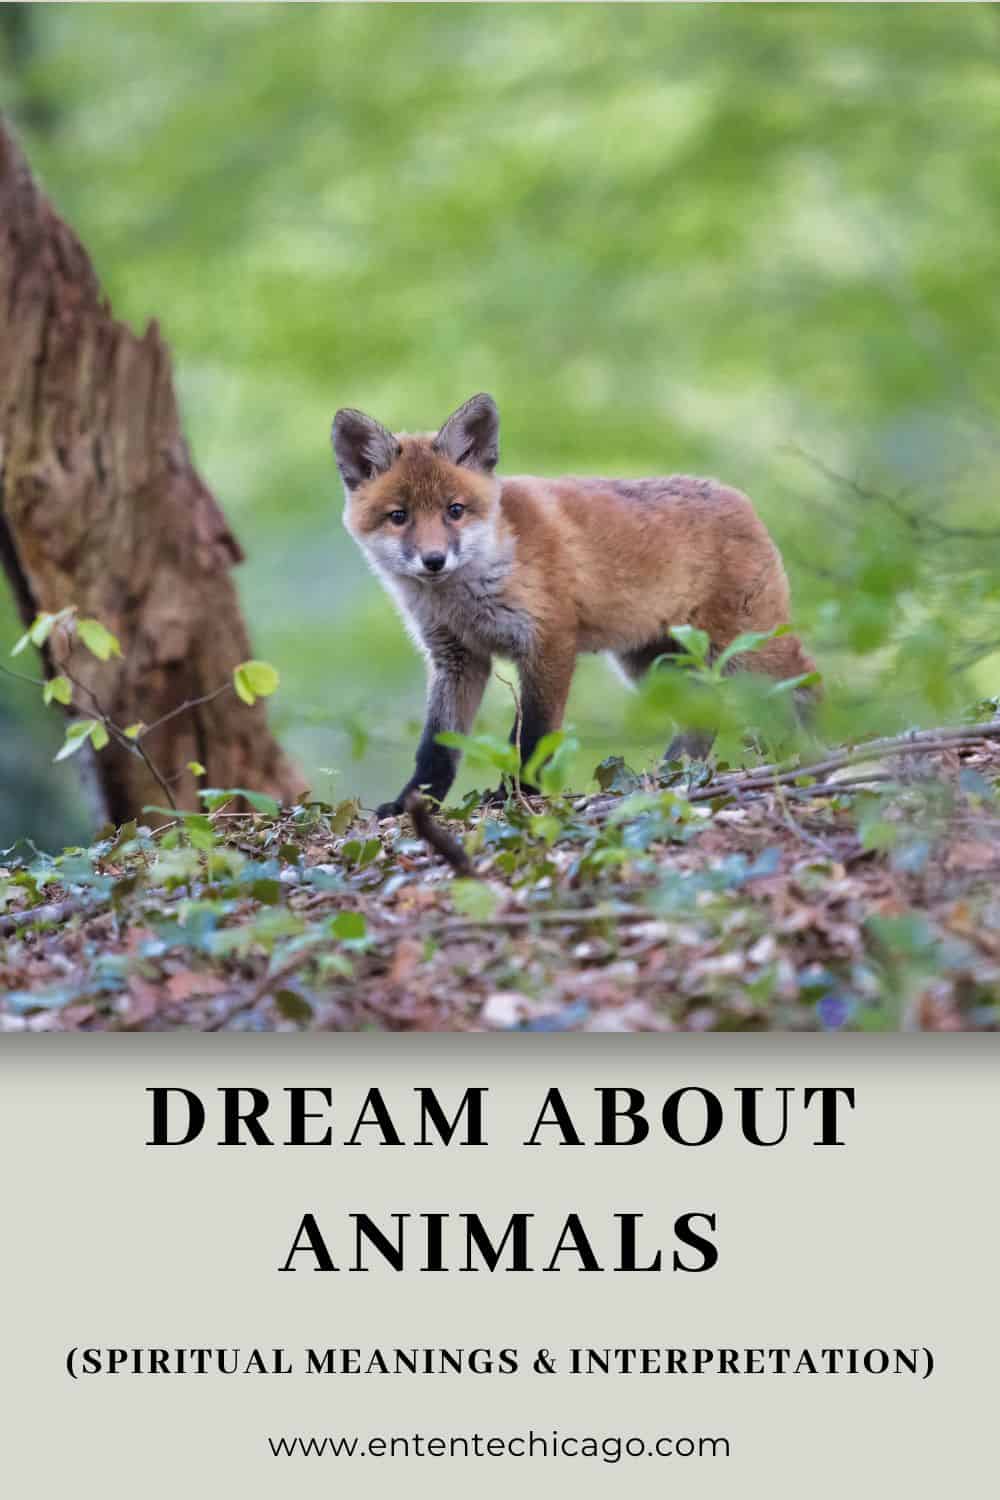 18 meanings to dream about animals